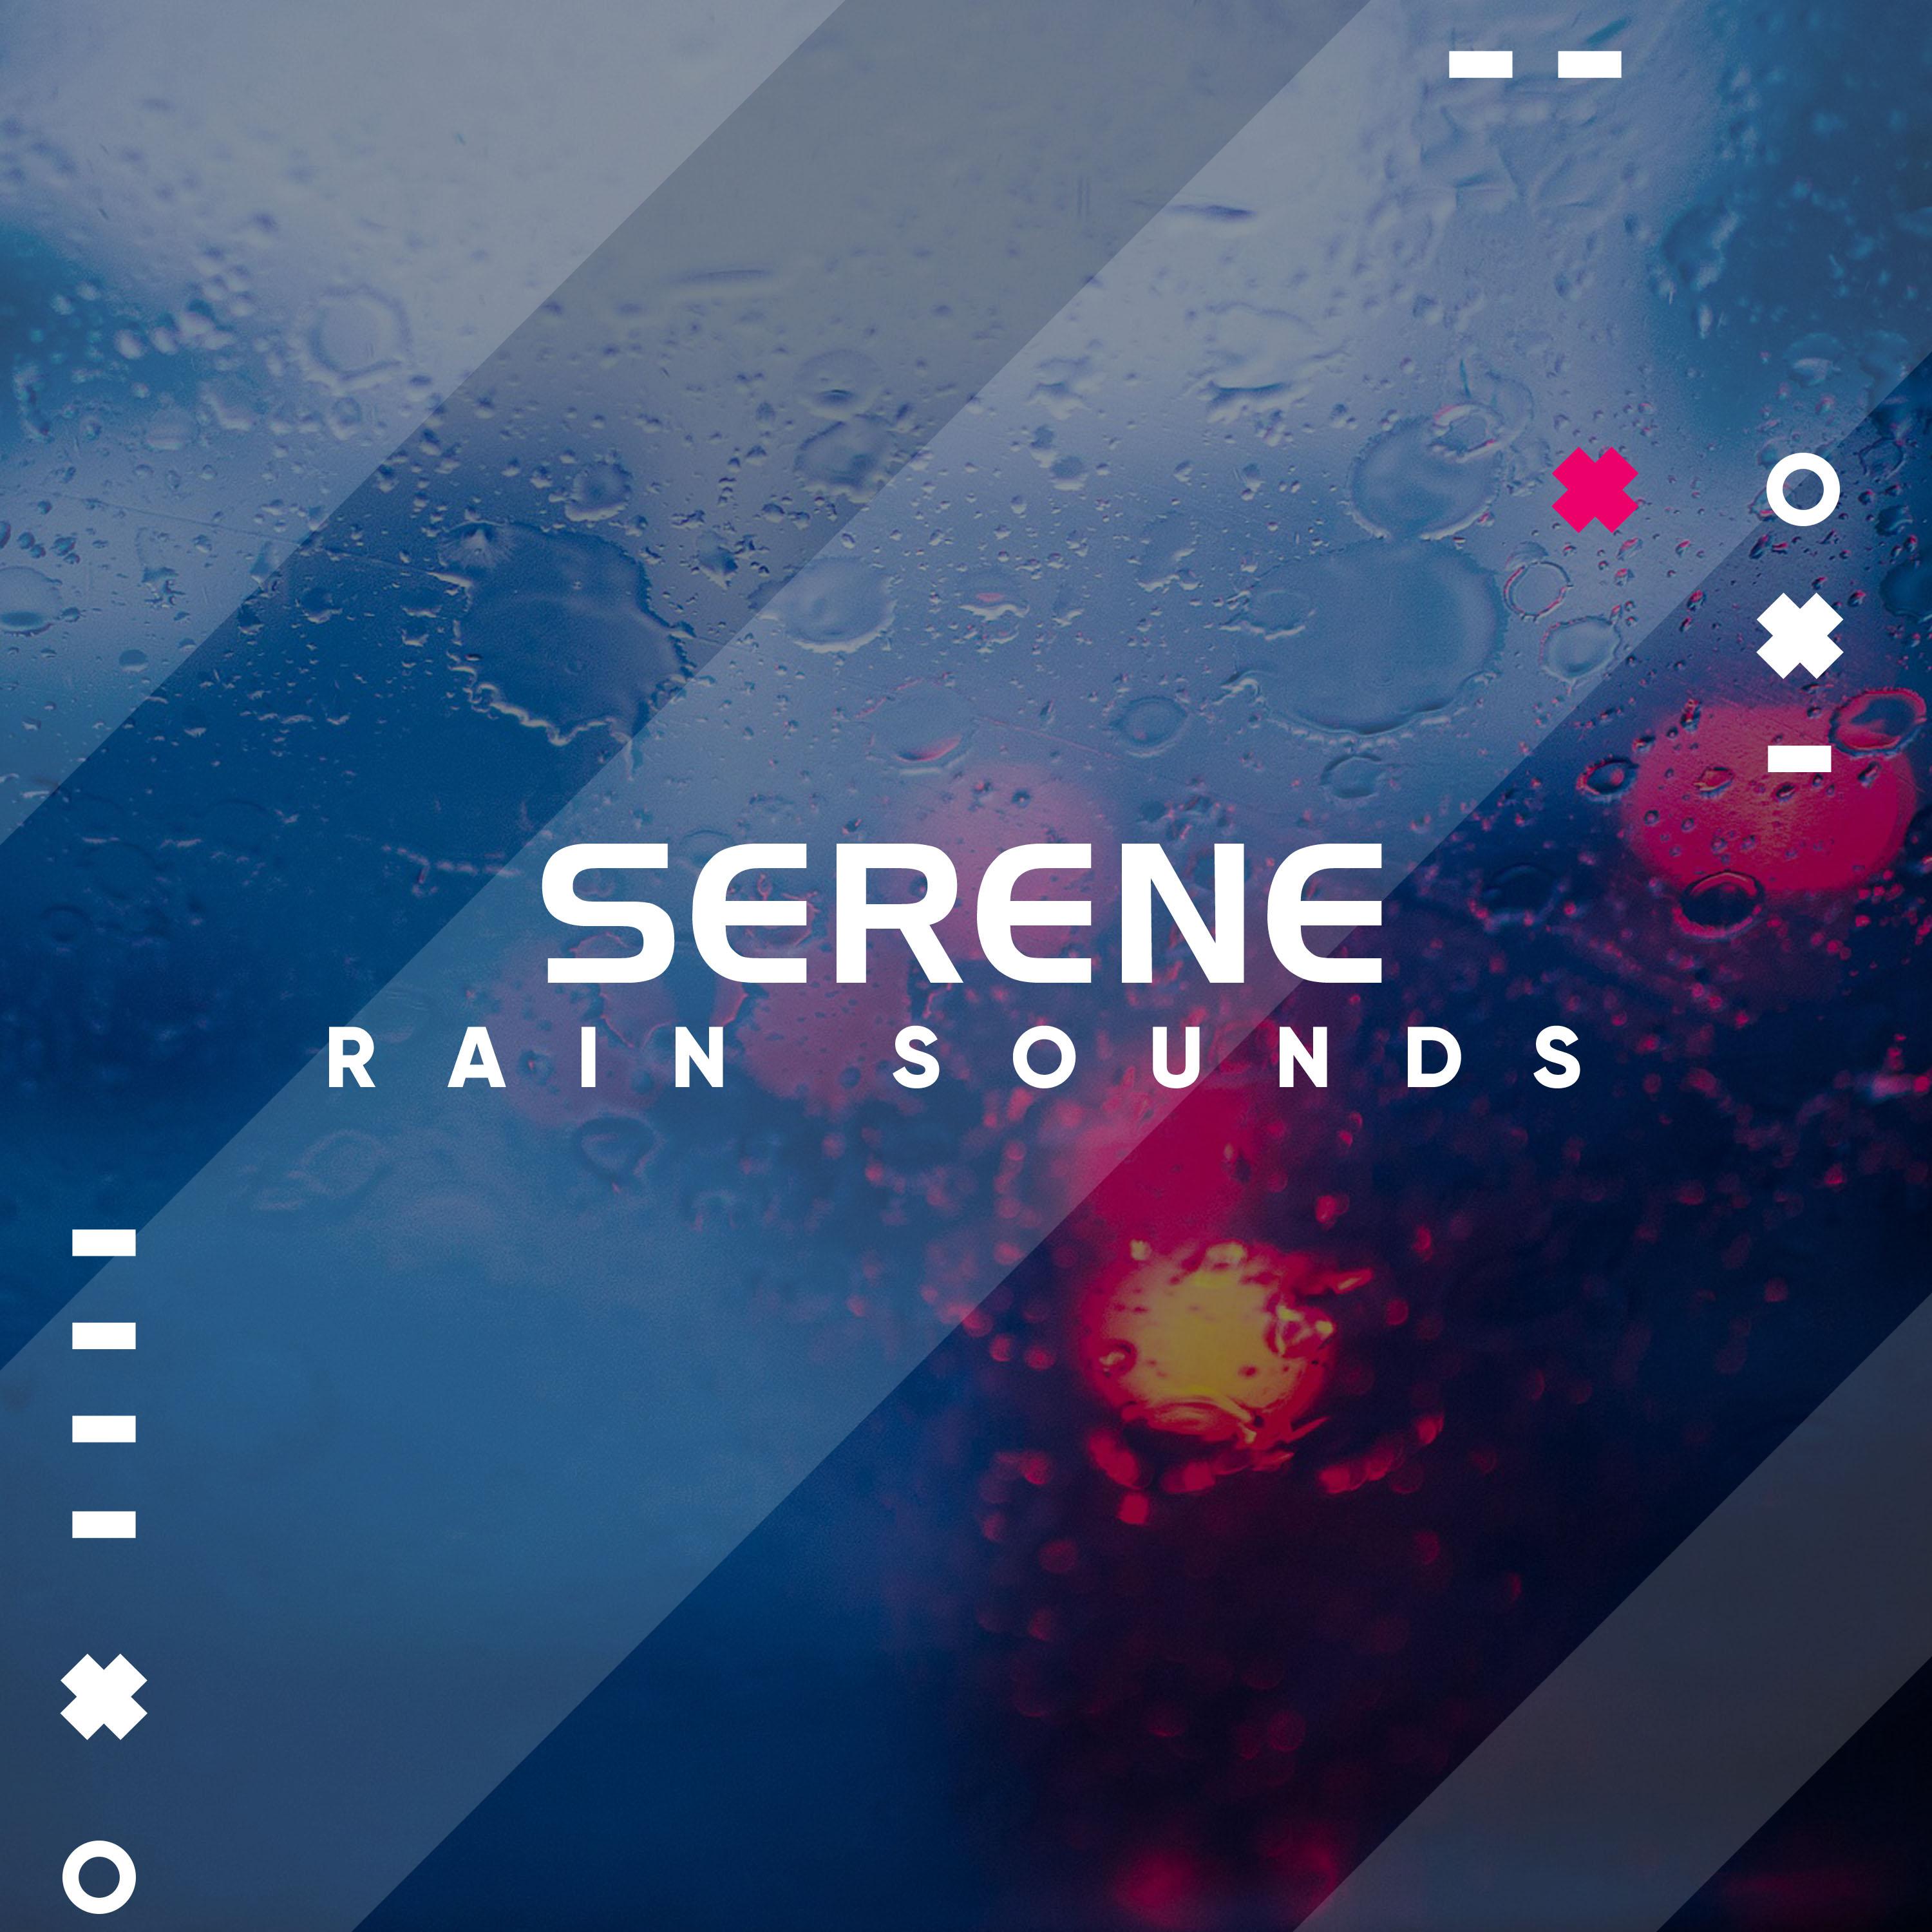 #10 Serene Rain Sounds to Relieve Stress